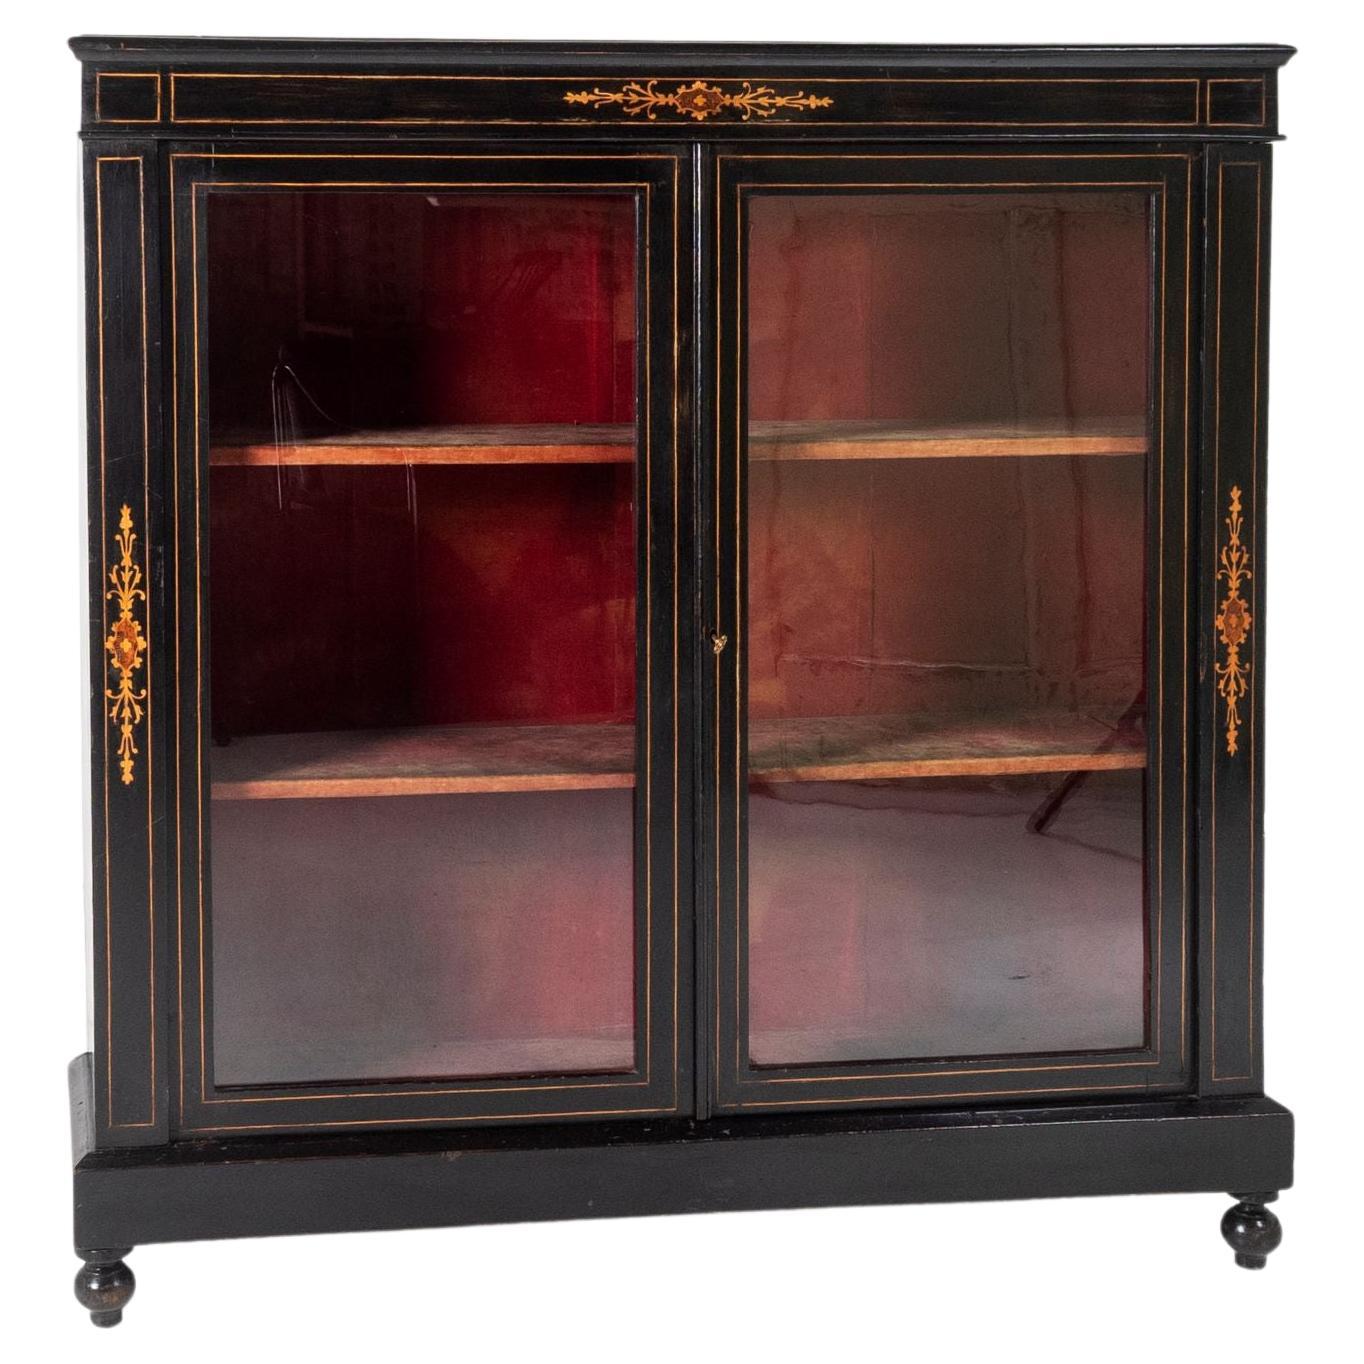 Early Victorian Ebonised Inlay Pier Cabinet Glazed Bookcase Velvet Lined